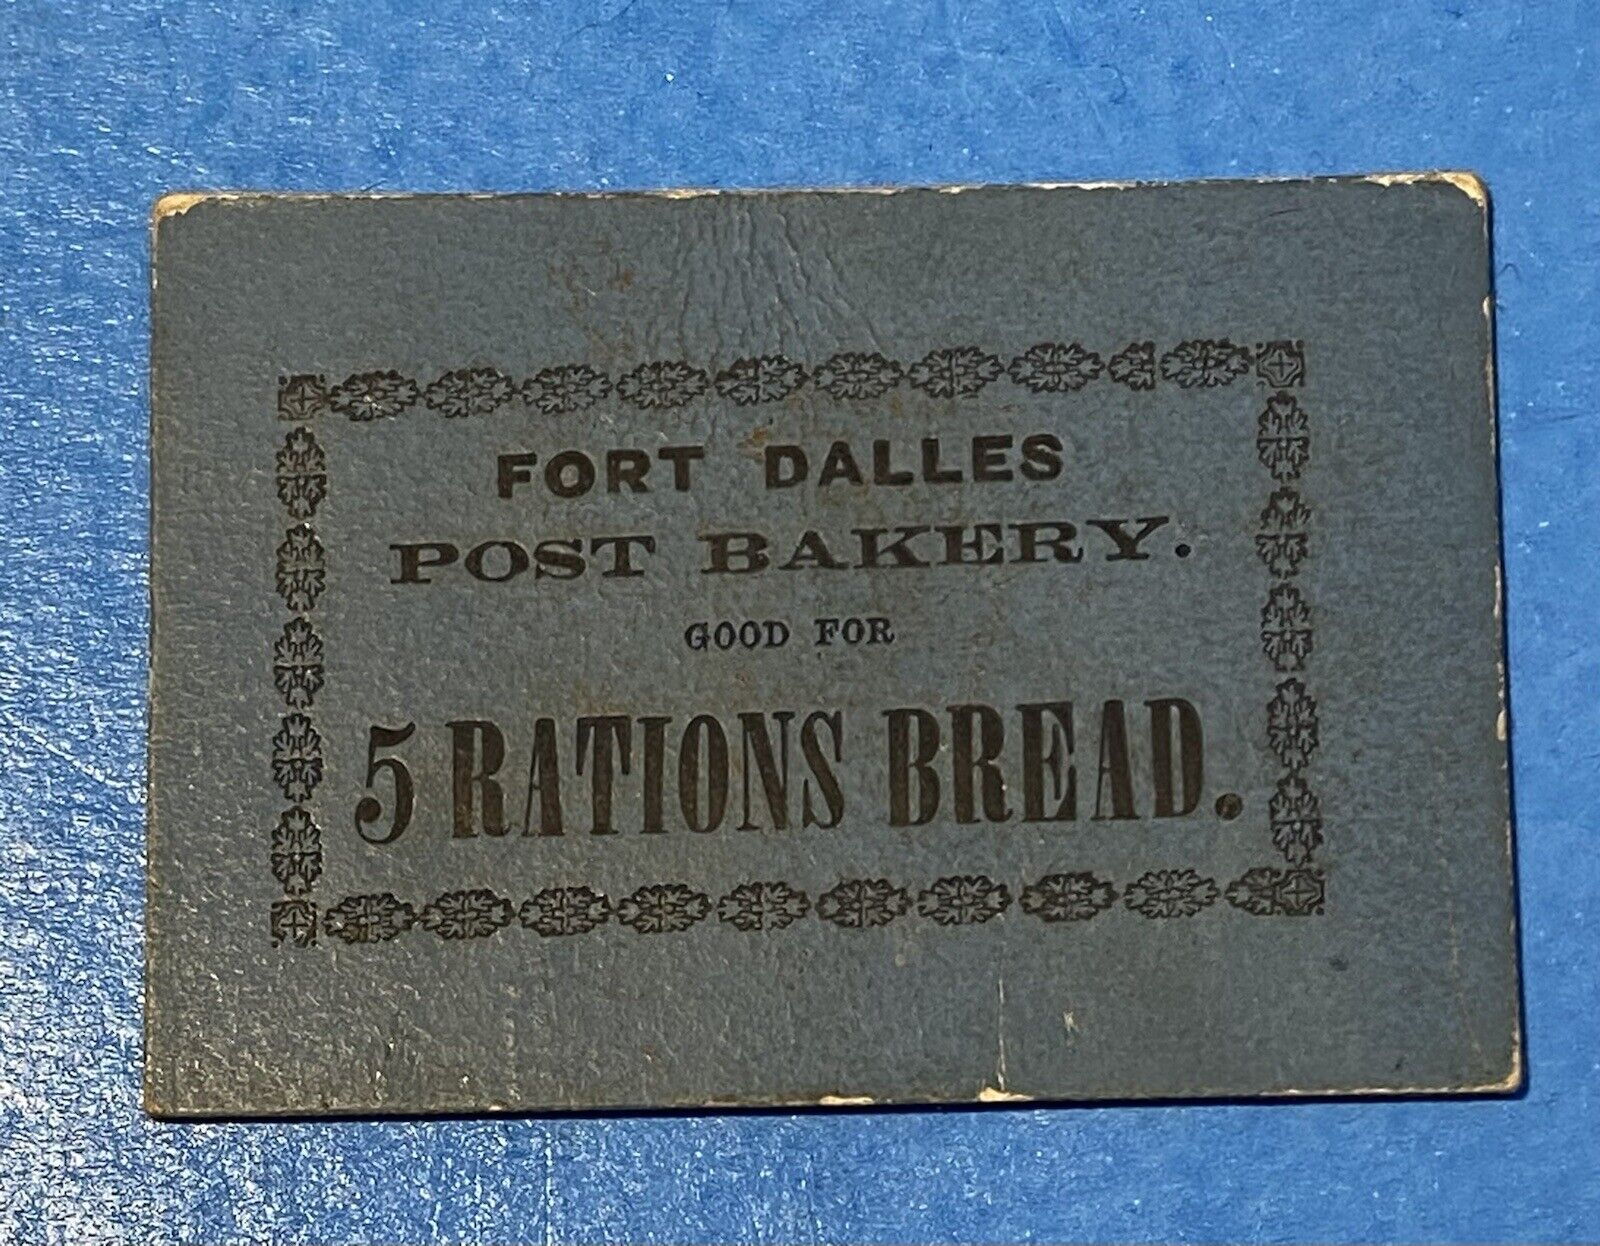 Fort Dallas, Oregon Bread Ration Chit, Post Bakery 1853 - 1867